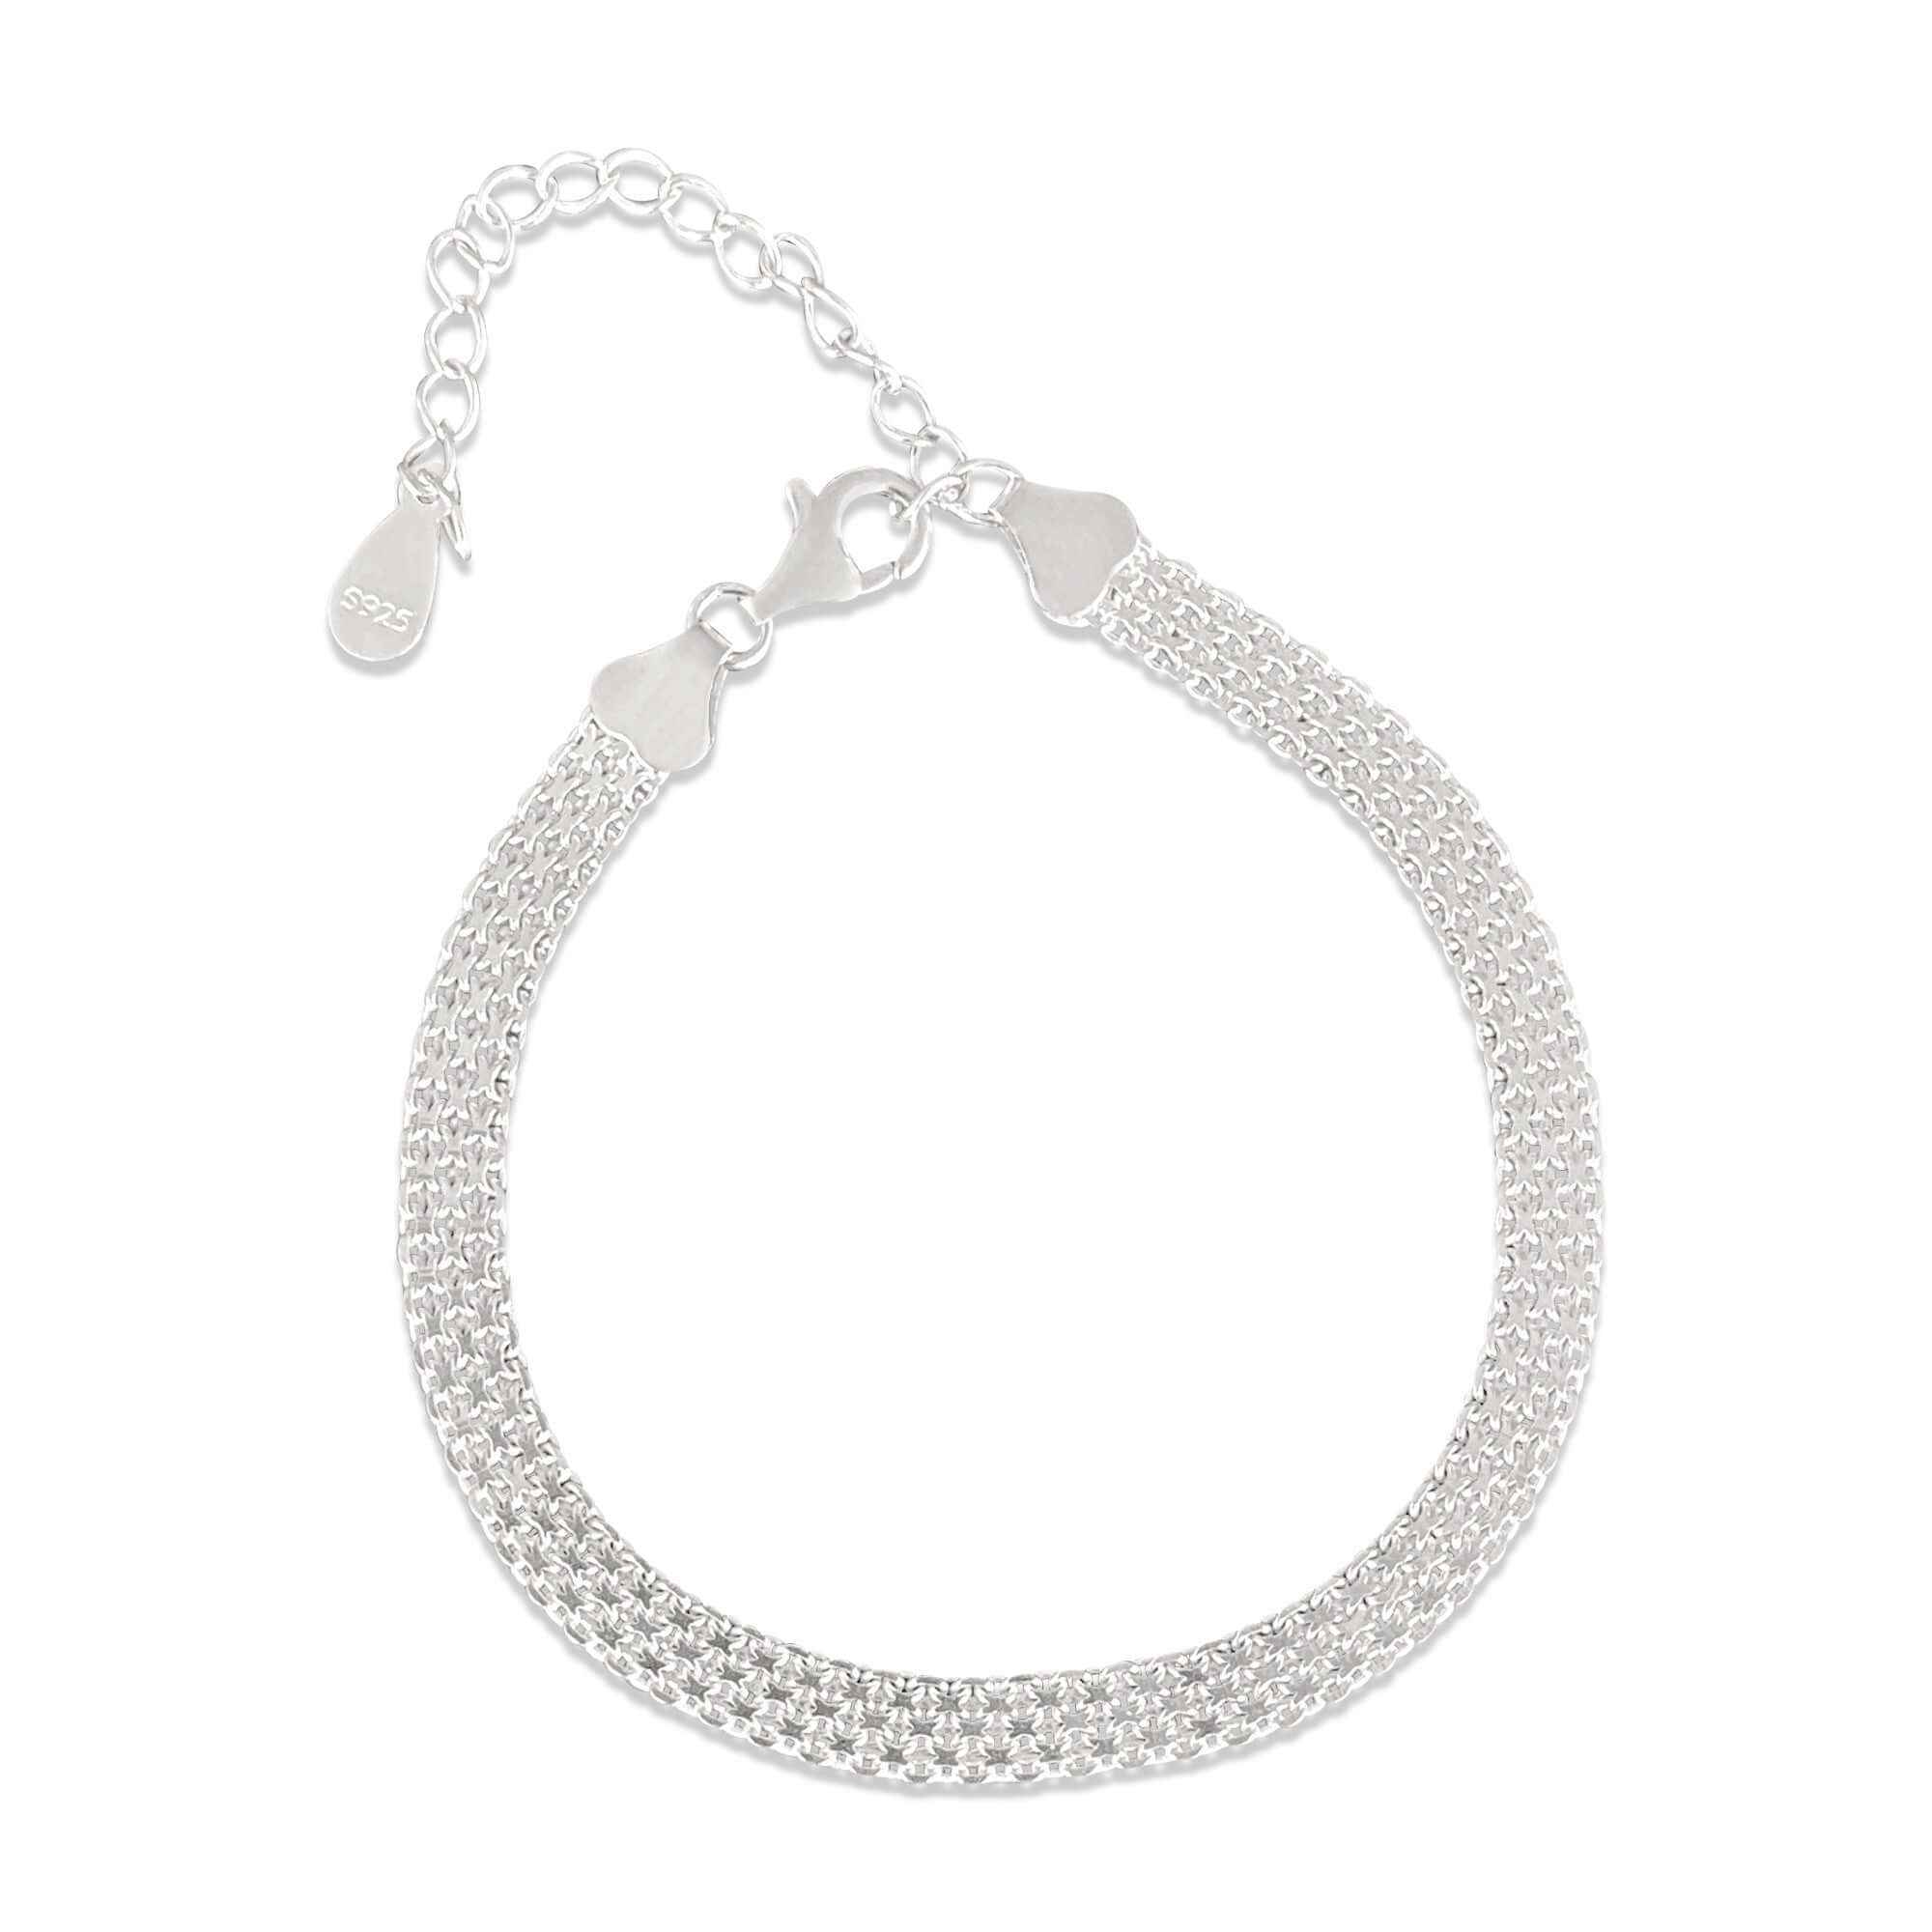 Dainty 925 sterling silver mesh bracelet by Alessandra James, perfect for special occasions.